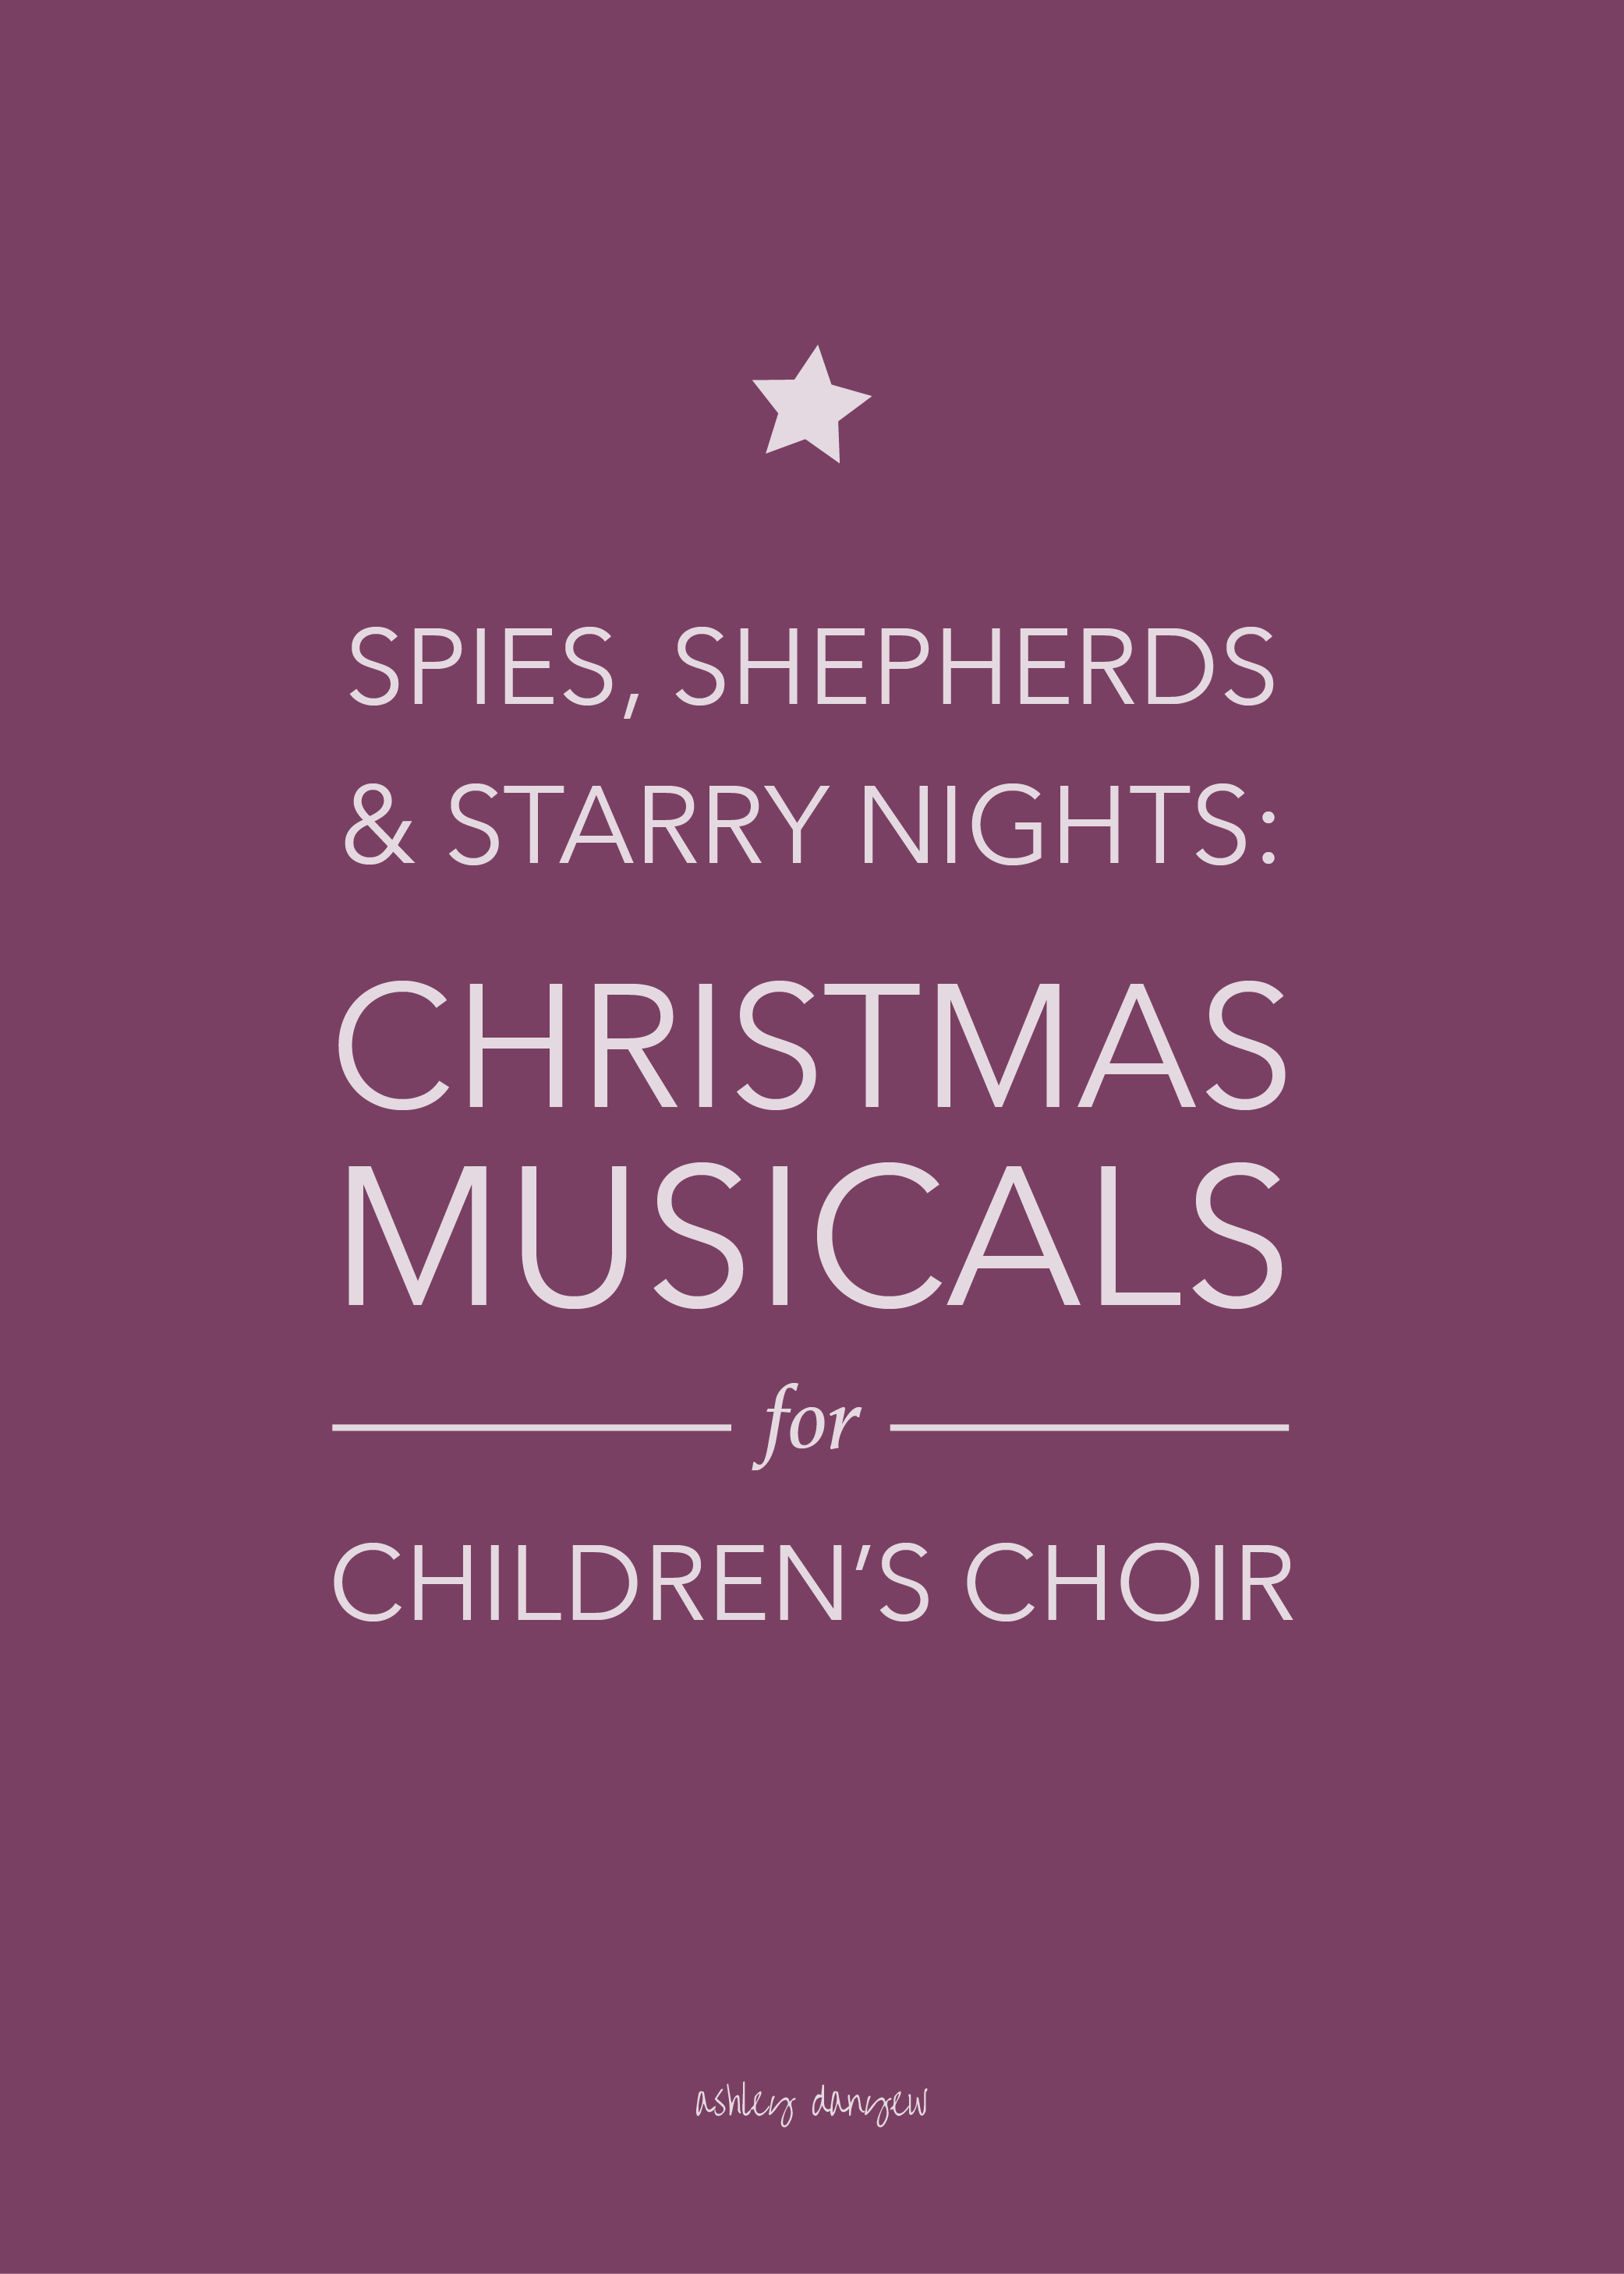 Christmas Musicals for Children's Choir-01.png